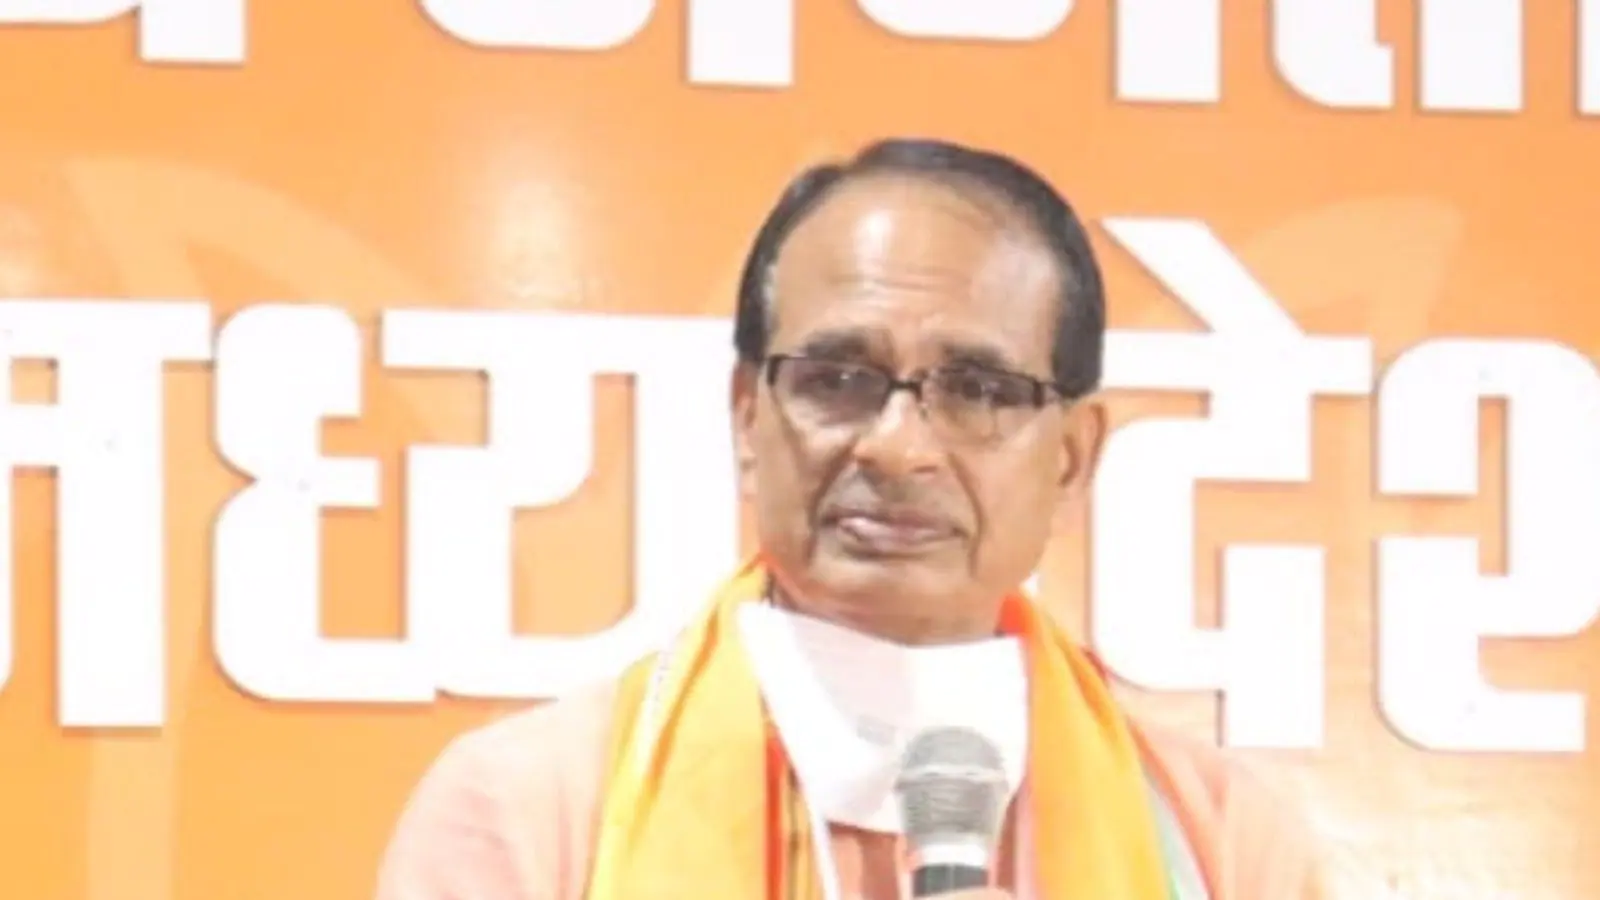 Action on the Spot: CM Shivraj Suspends Two in Middle of Public Address